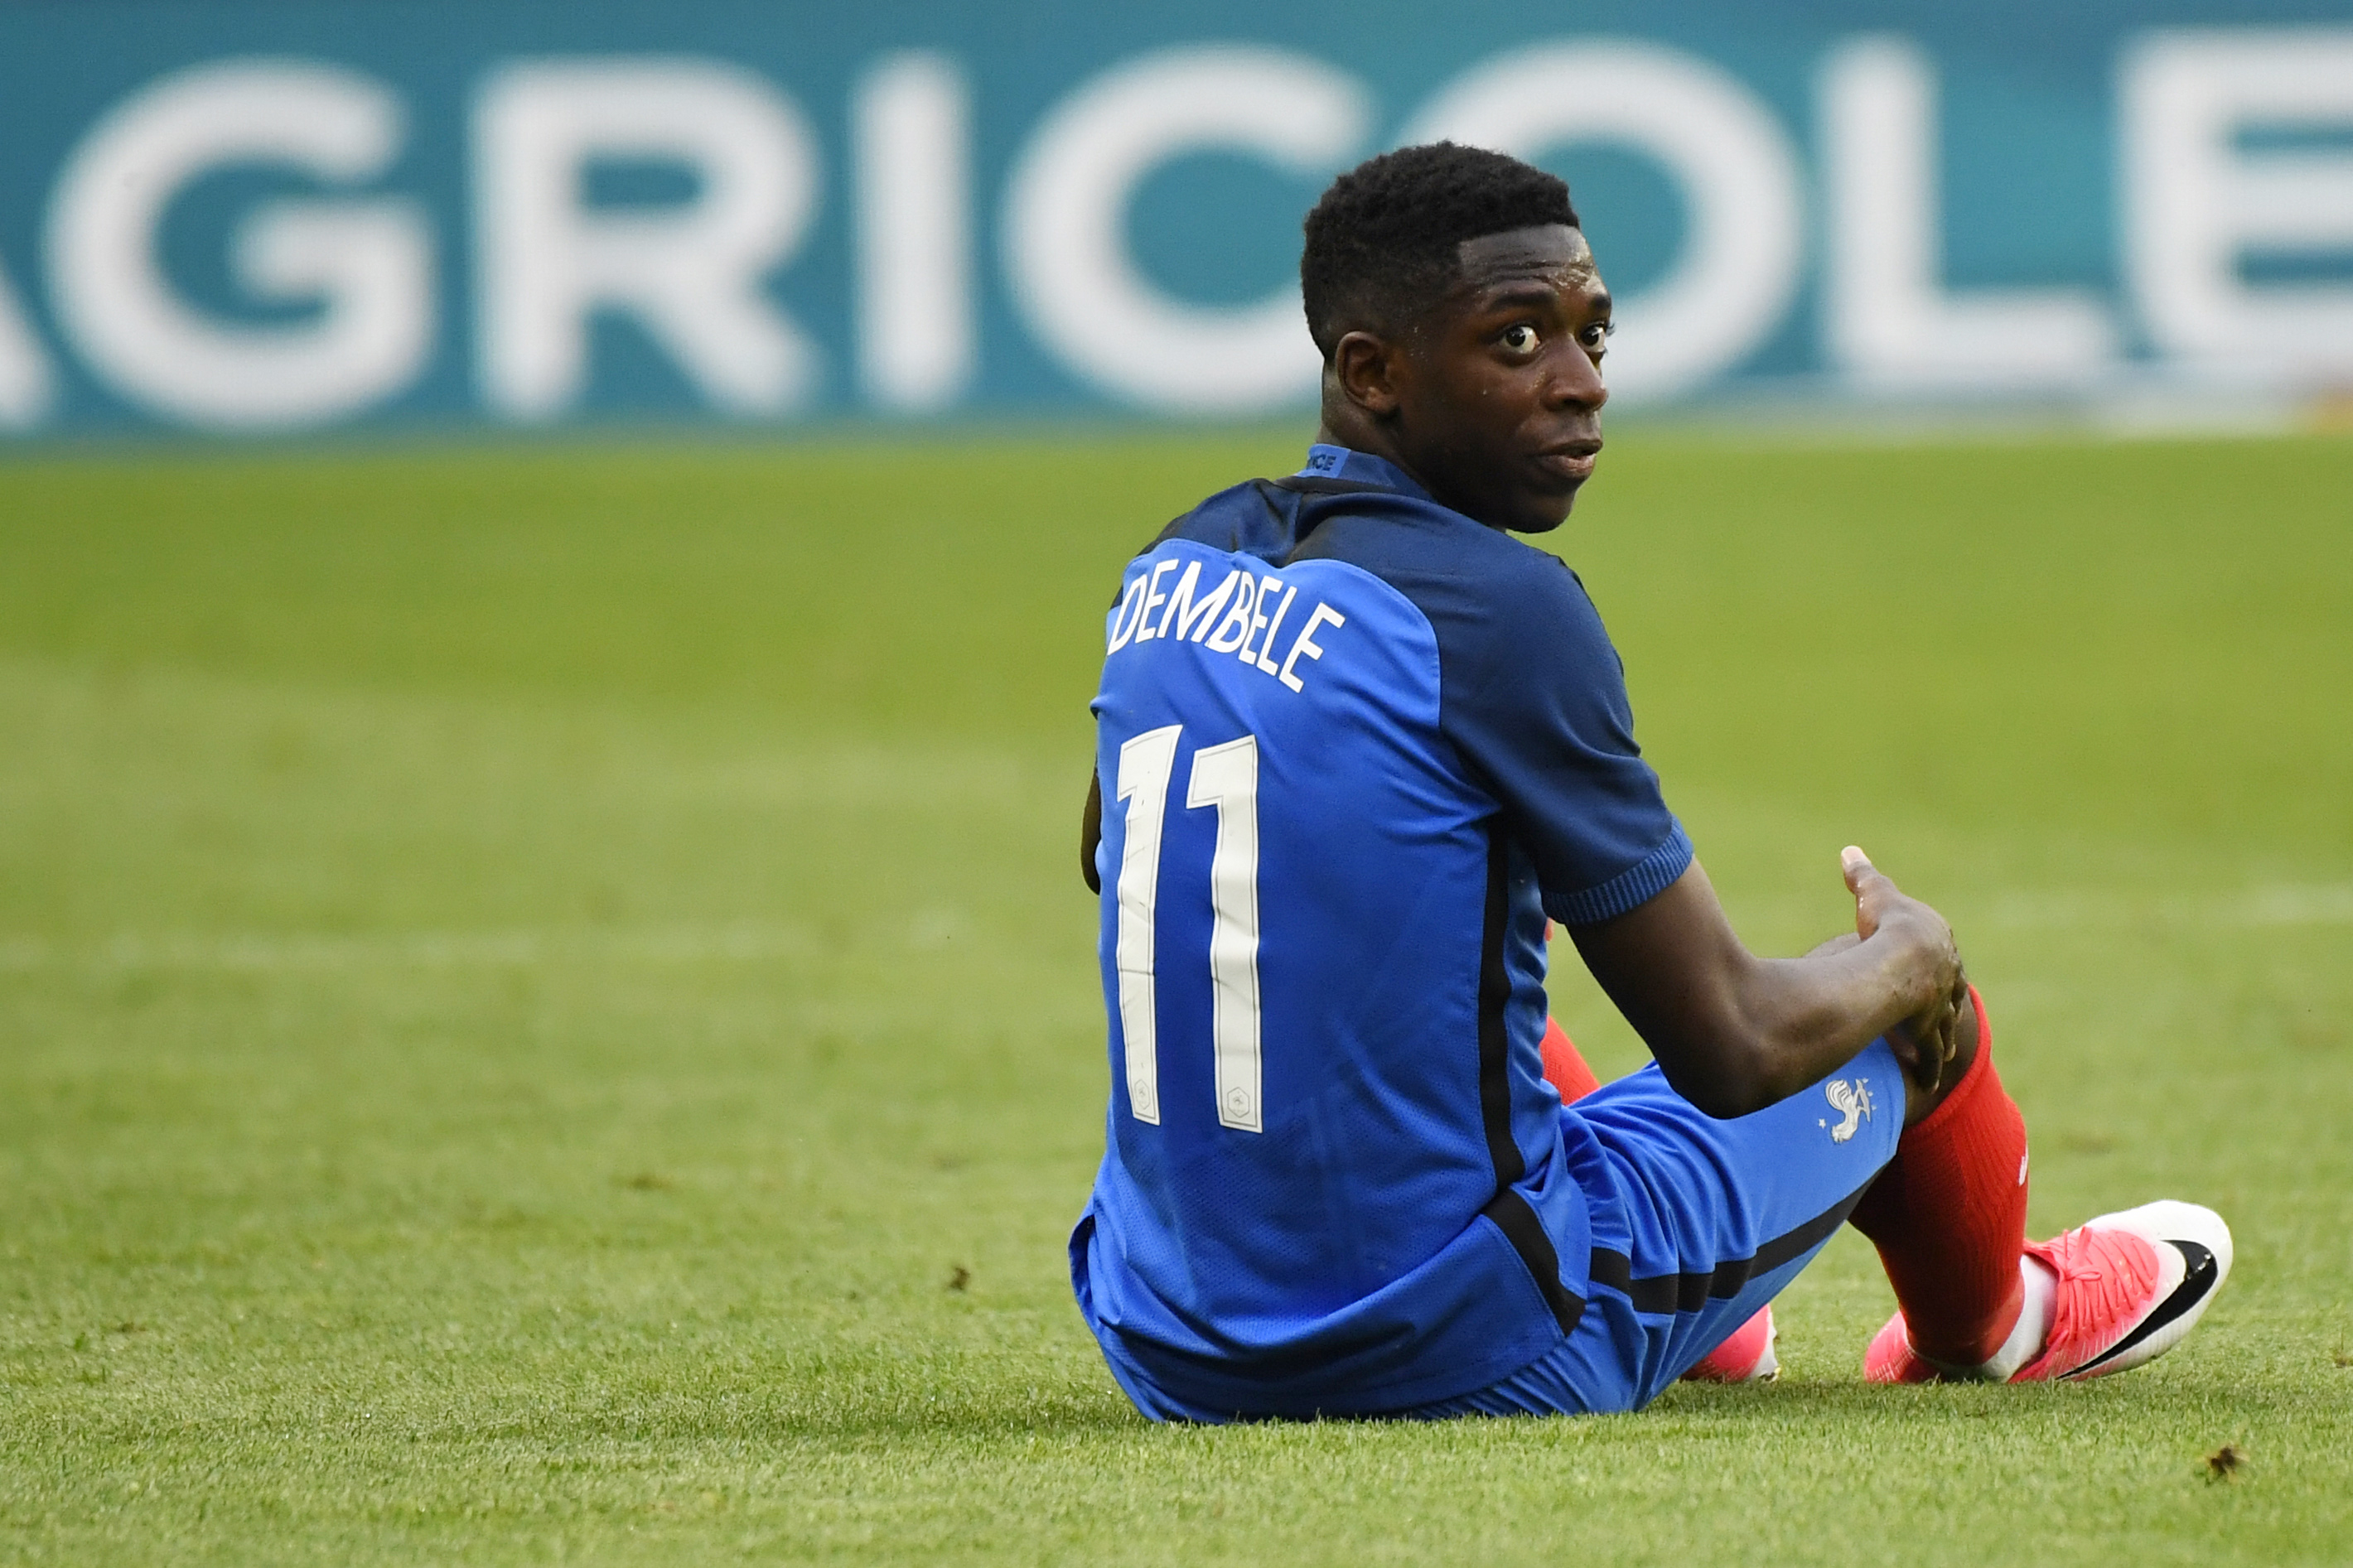 France's forward Ousmane Dembele looks on during the friendly football match between France and Paraguay on June 02, 2017 at the Roazhon park stadium in Rennes, western France. / AFP PHOTO / DAMIEN MEYER        (Photo credit should read DAMIEN MEYER/AFP/Getty Images)